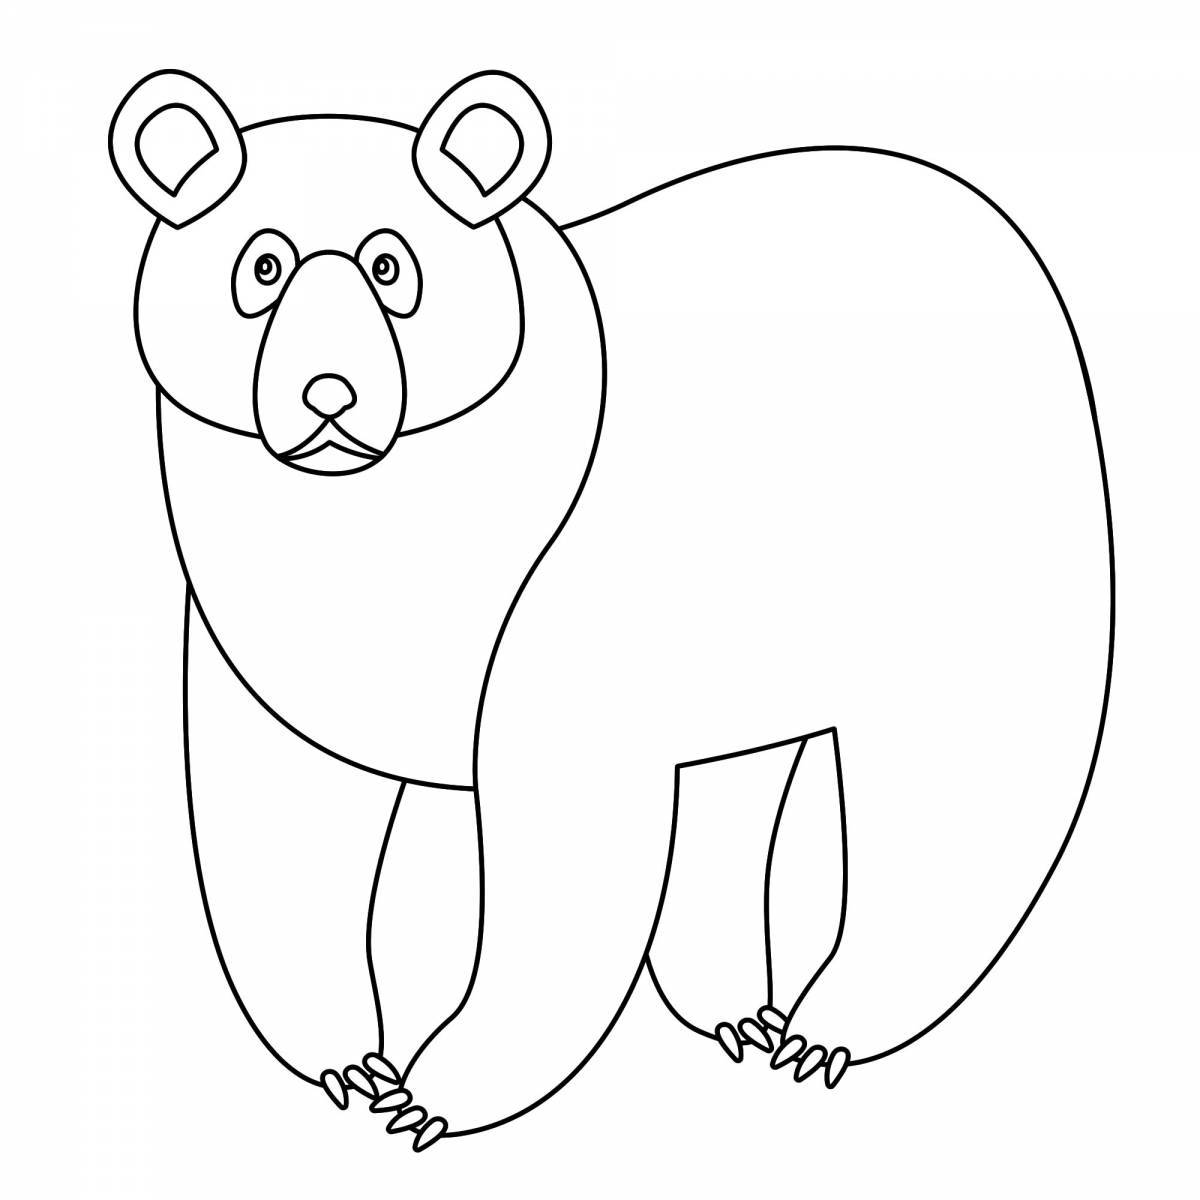 Cute bear coloring book for kids 3-4 years old